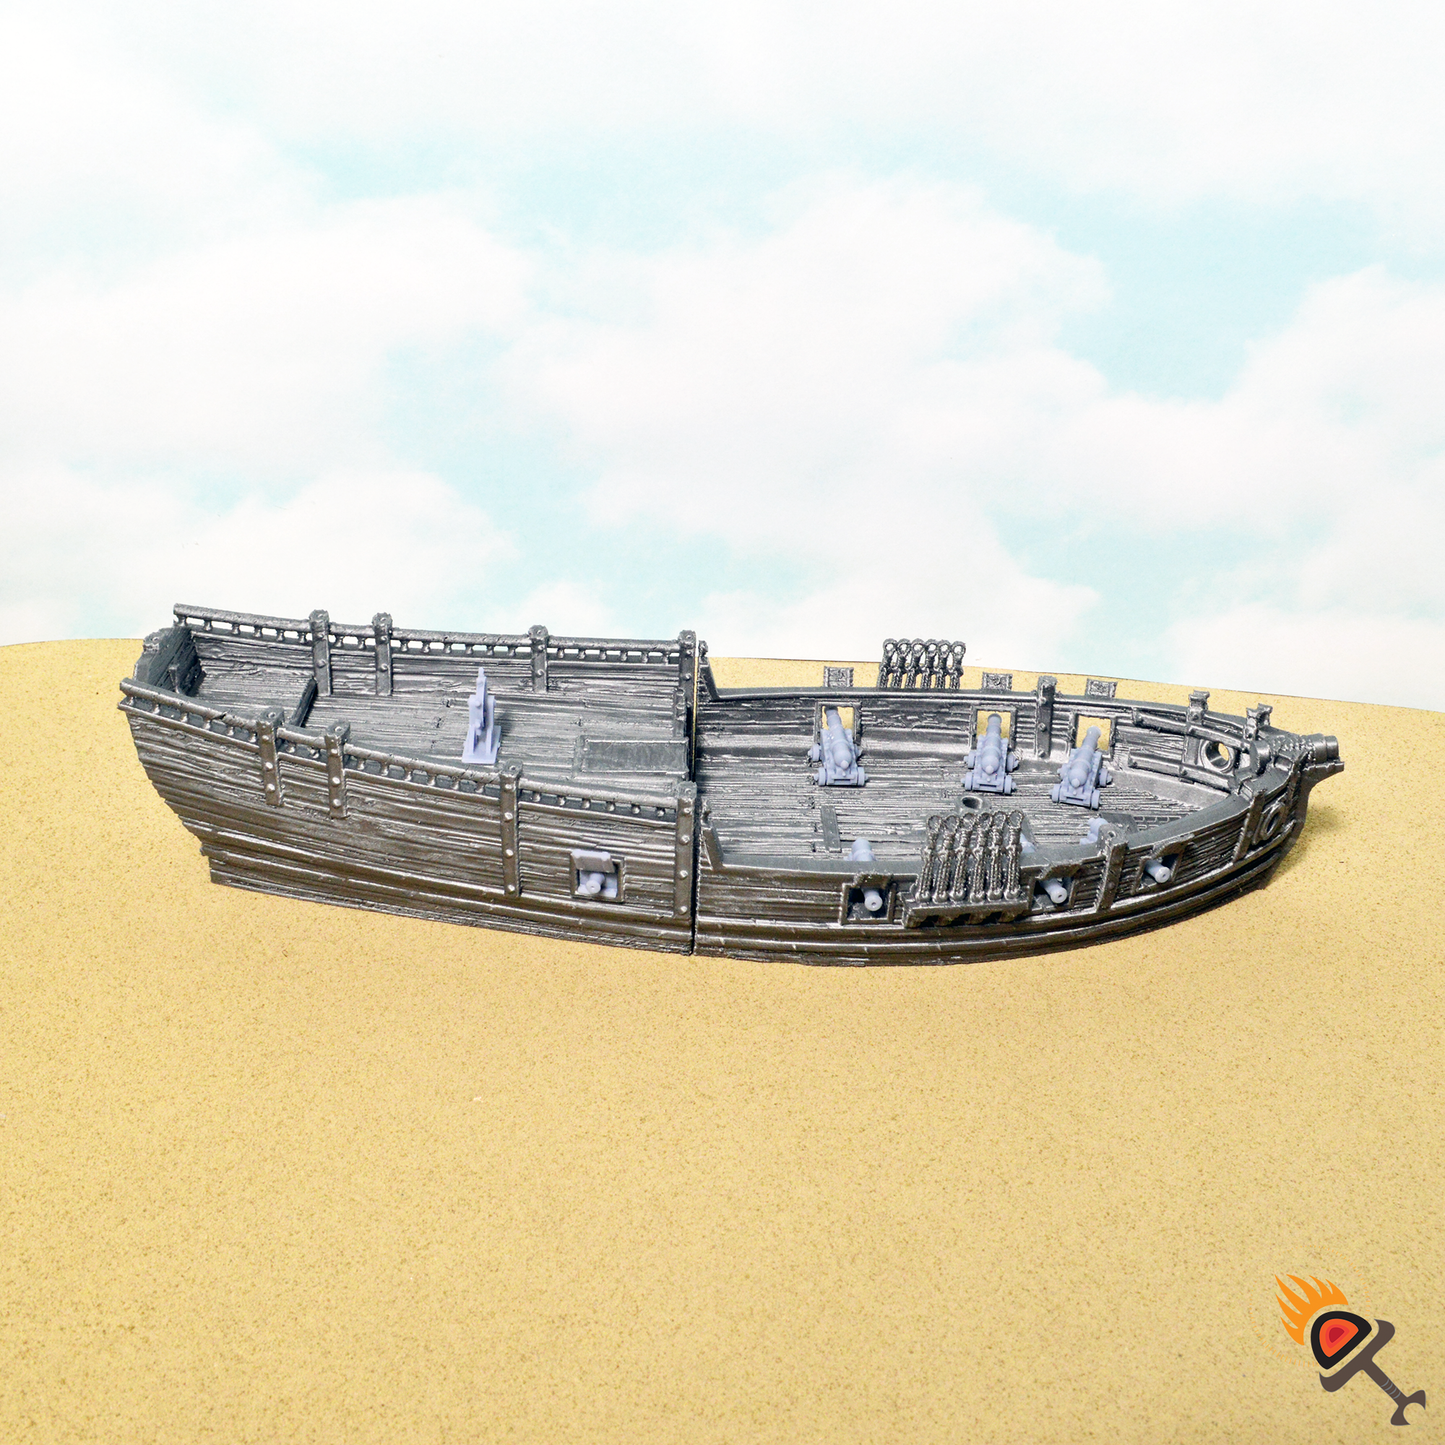 Miniature Sloop 28mm for D&D Ships, DnD Pathfinder Pirate Boat, Blood and Plunder, Ghost of Saltmarsh